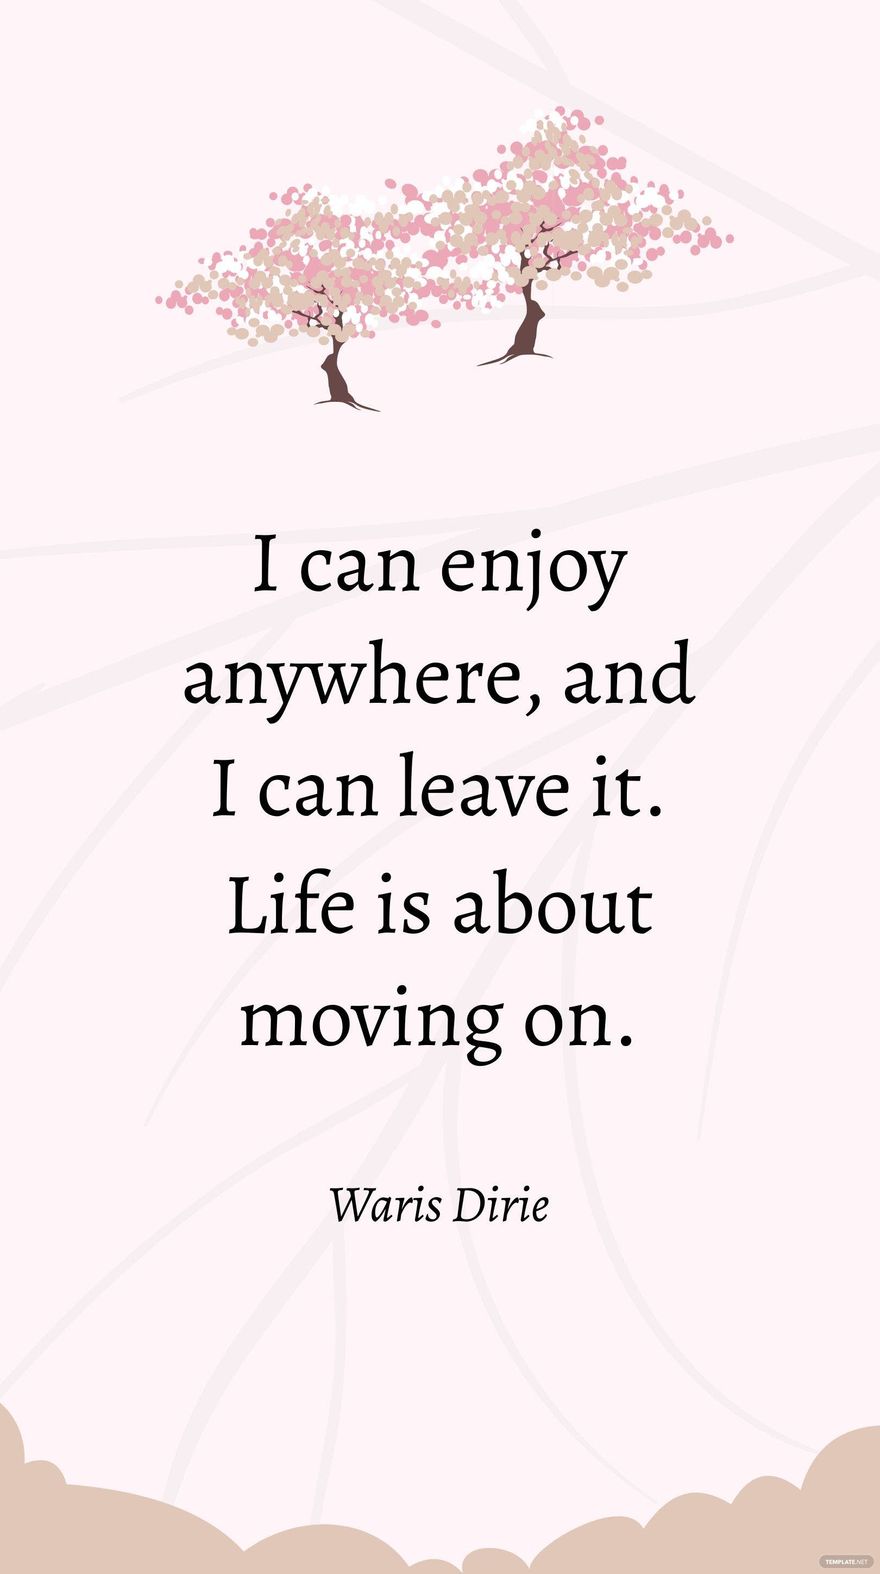 Free Waris Dirie - I can enjoy anywhere, and I can leave it. Life is about moving on.